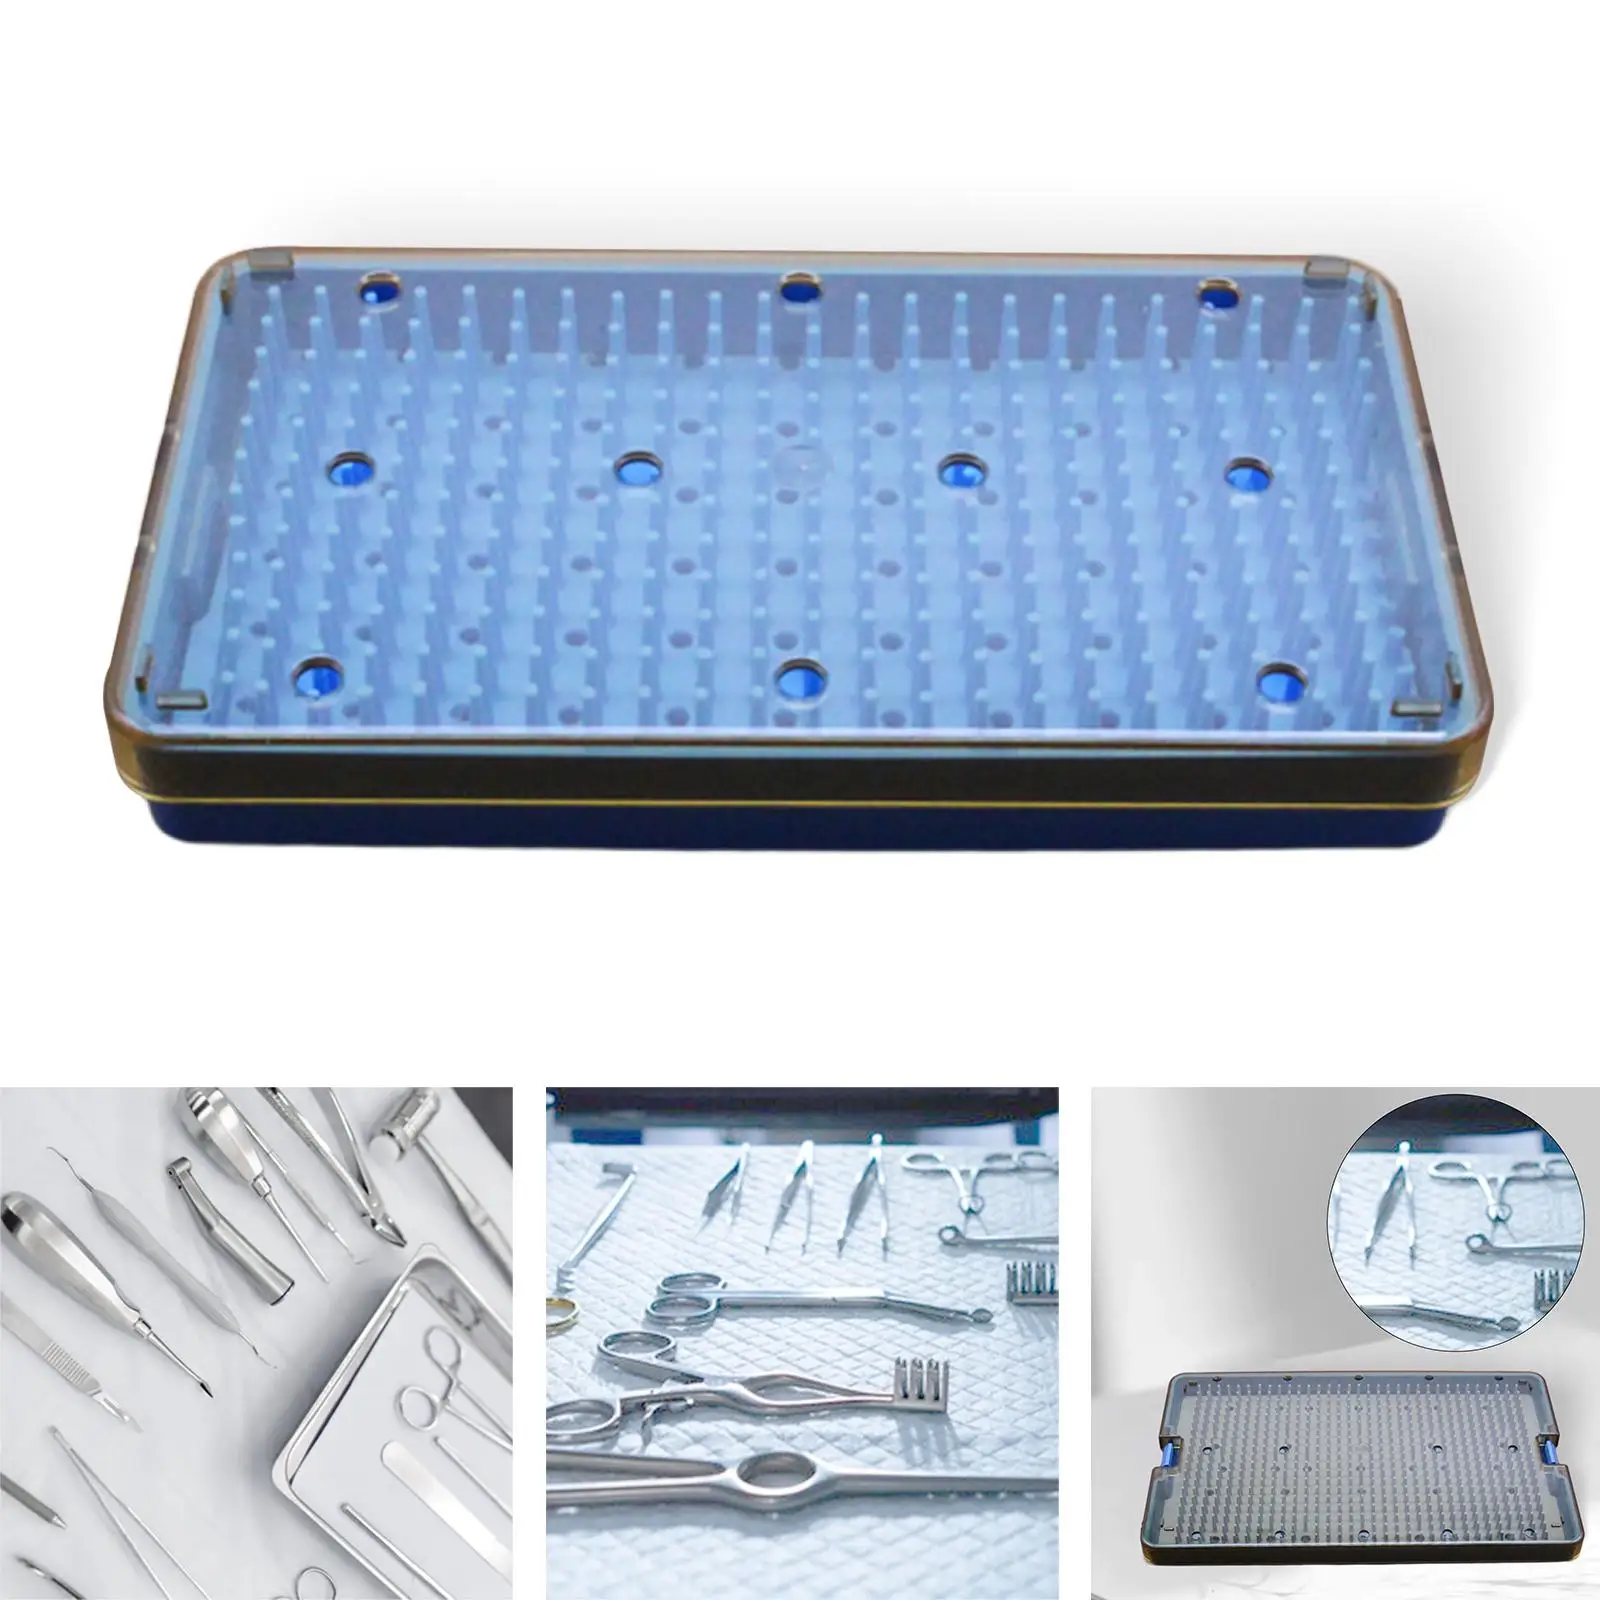 Silicone Sterilization Cassette Instruments Disinfection Box Disinfection Case Sterilization Tray for Ophthalmic Eye Tools